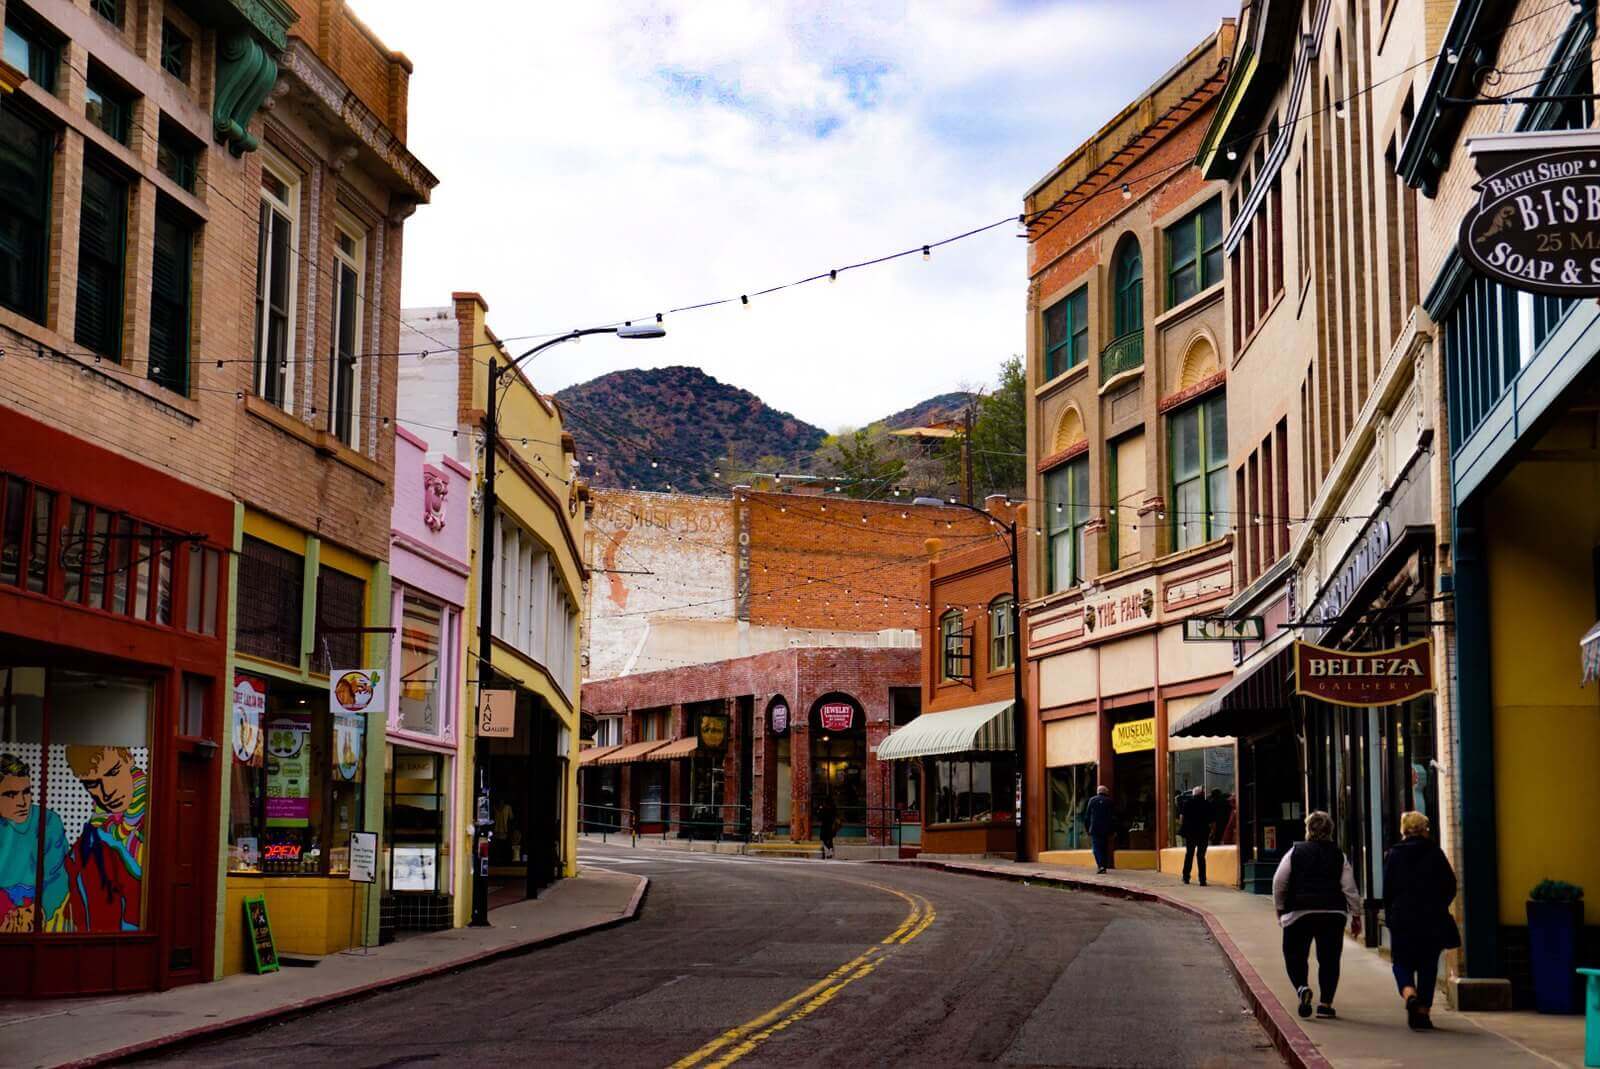 From Mining Town to Historic Gay Oasis Discover Bisbee, Arizona